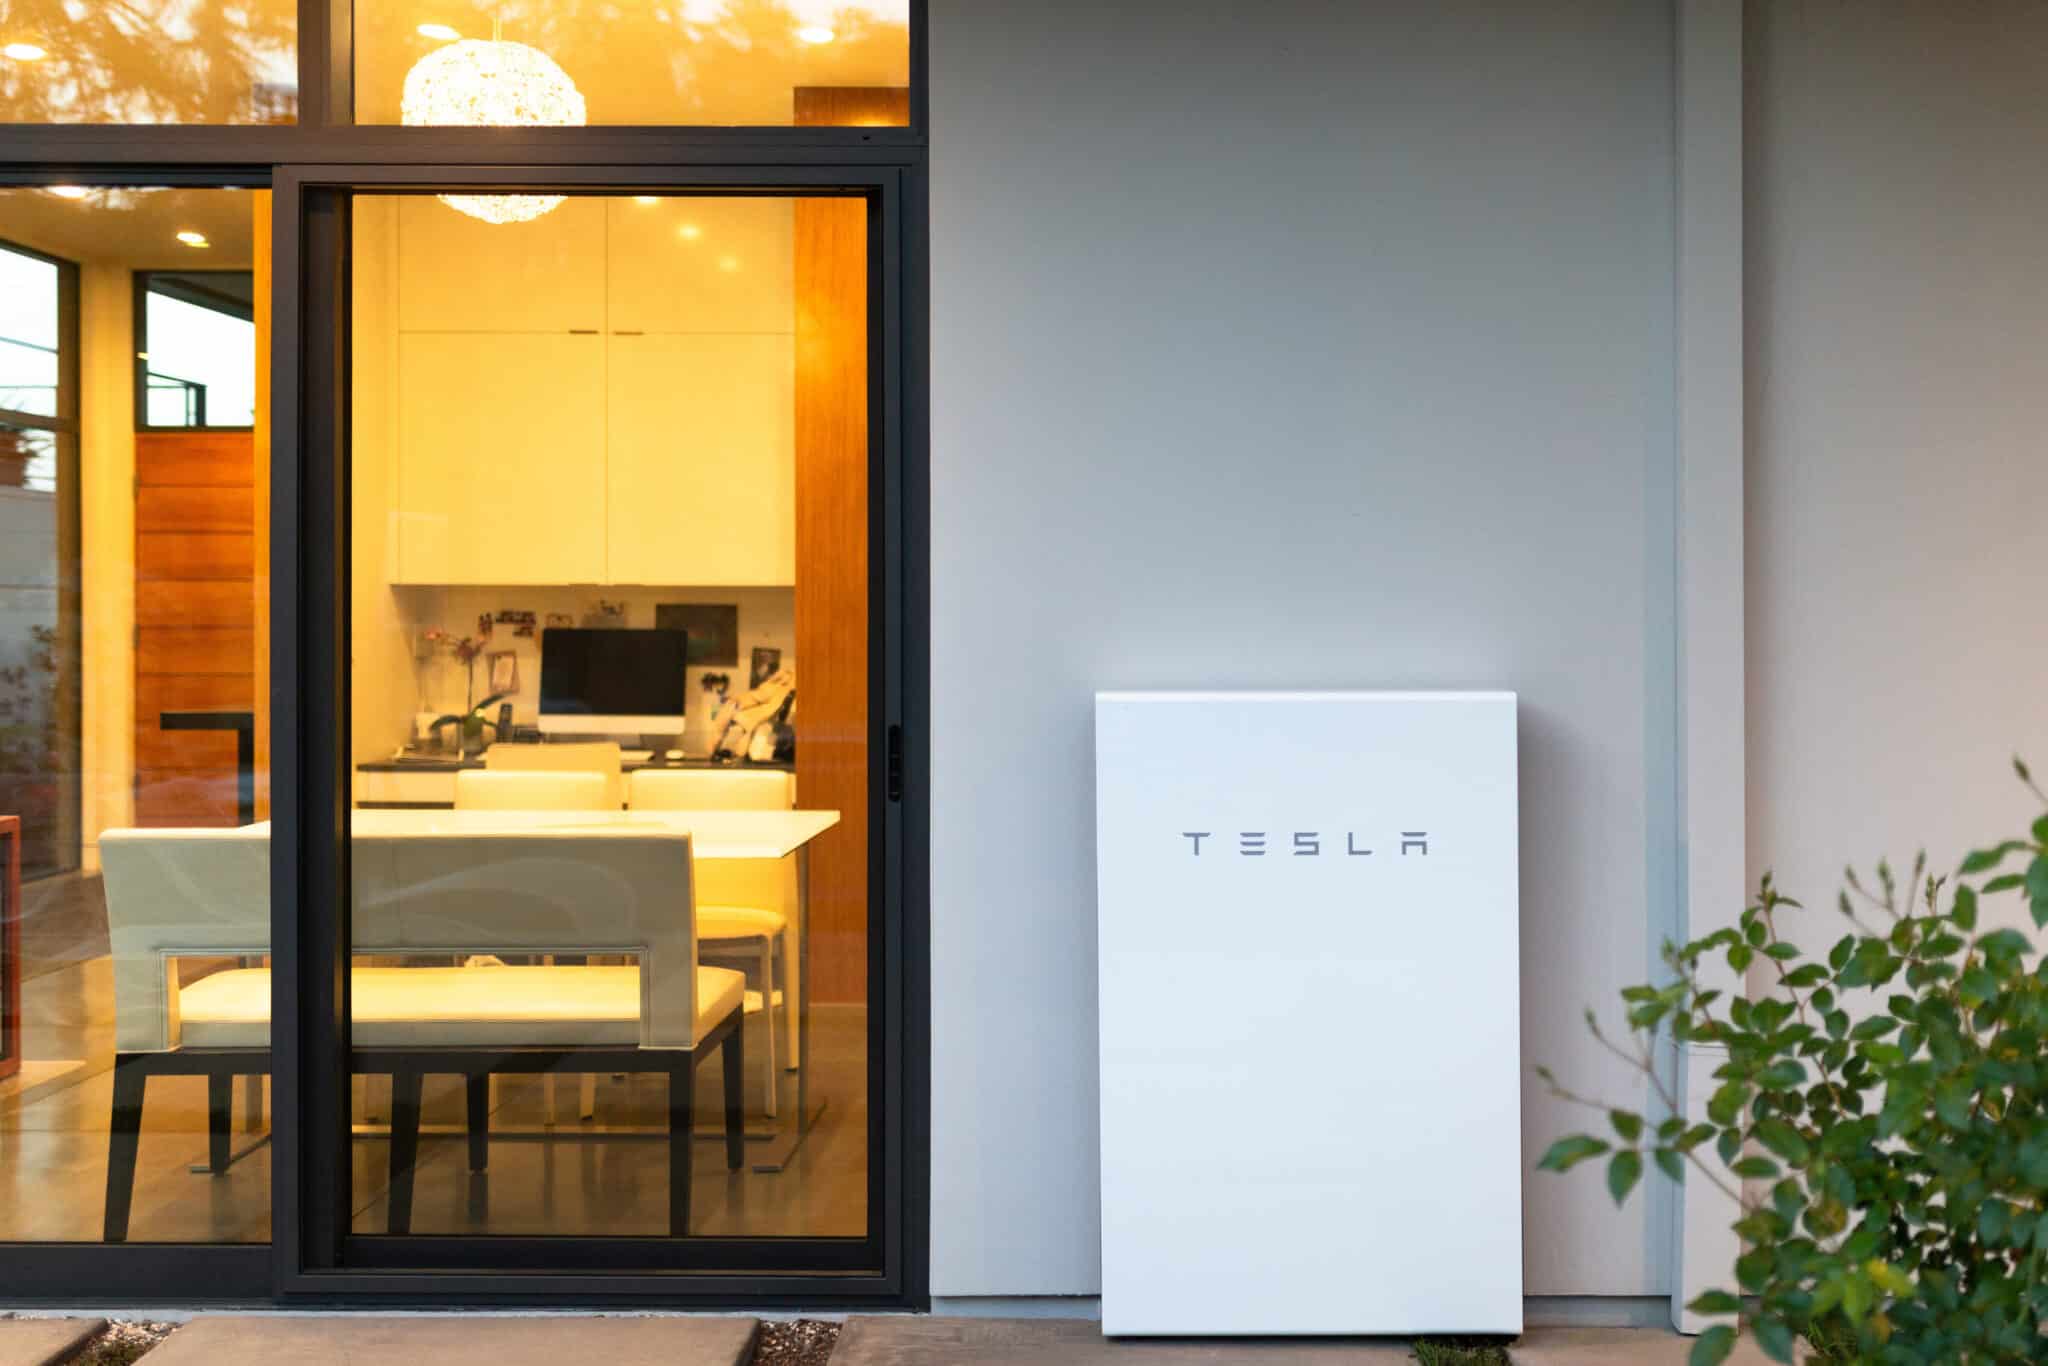 Tesla Powerwalls are useful in with Oklahoma solar panel systems because of frequent power outages